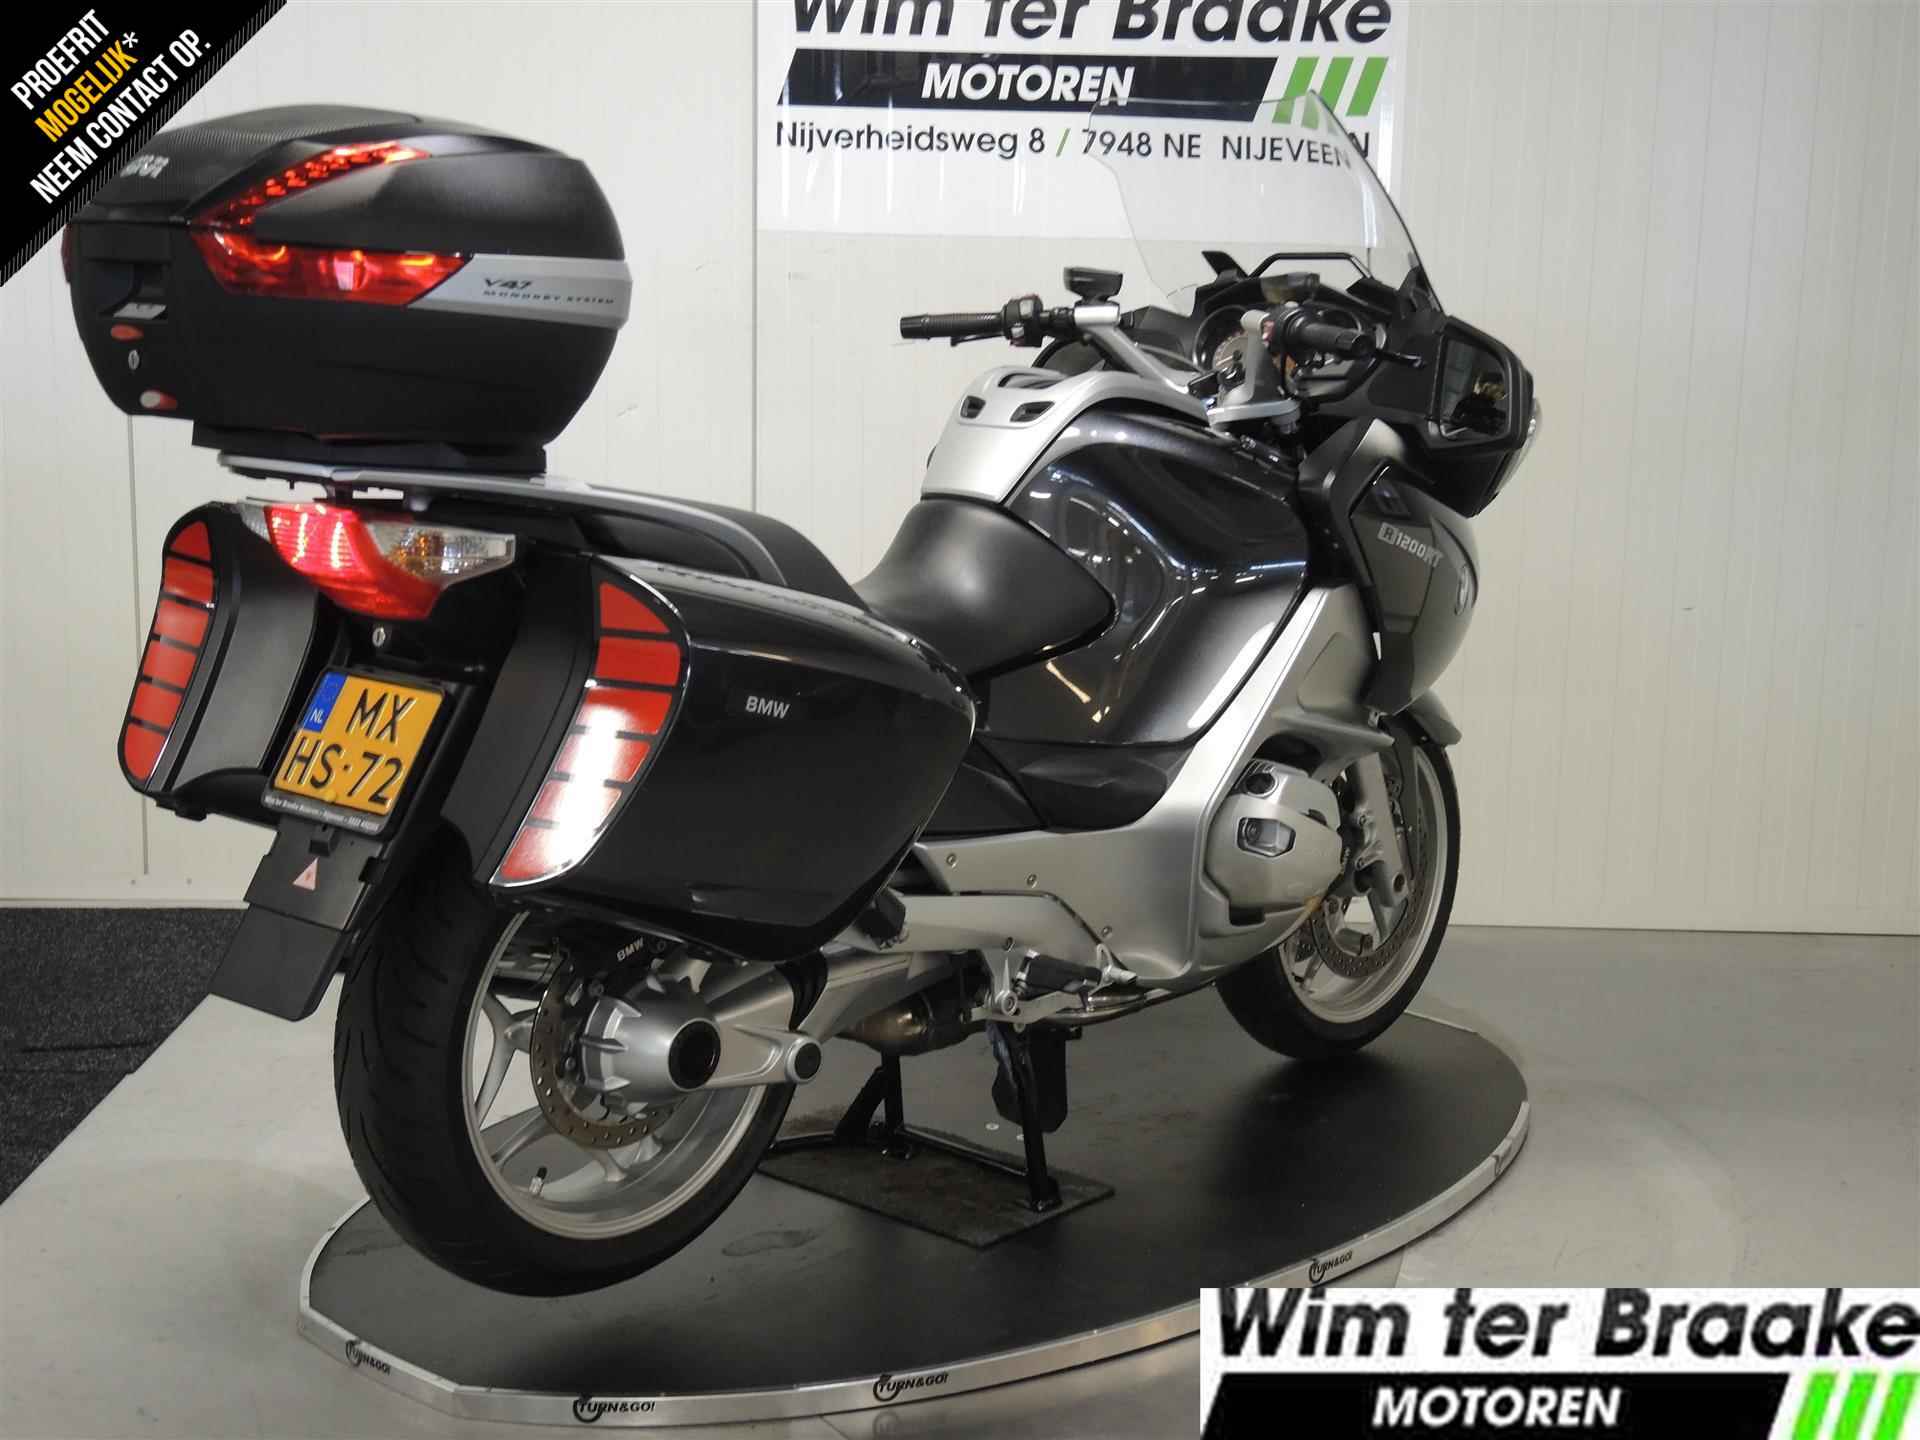 BMW R 1200 RT ABS - 7/11